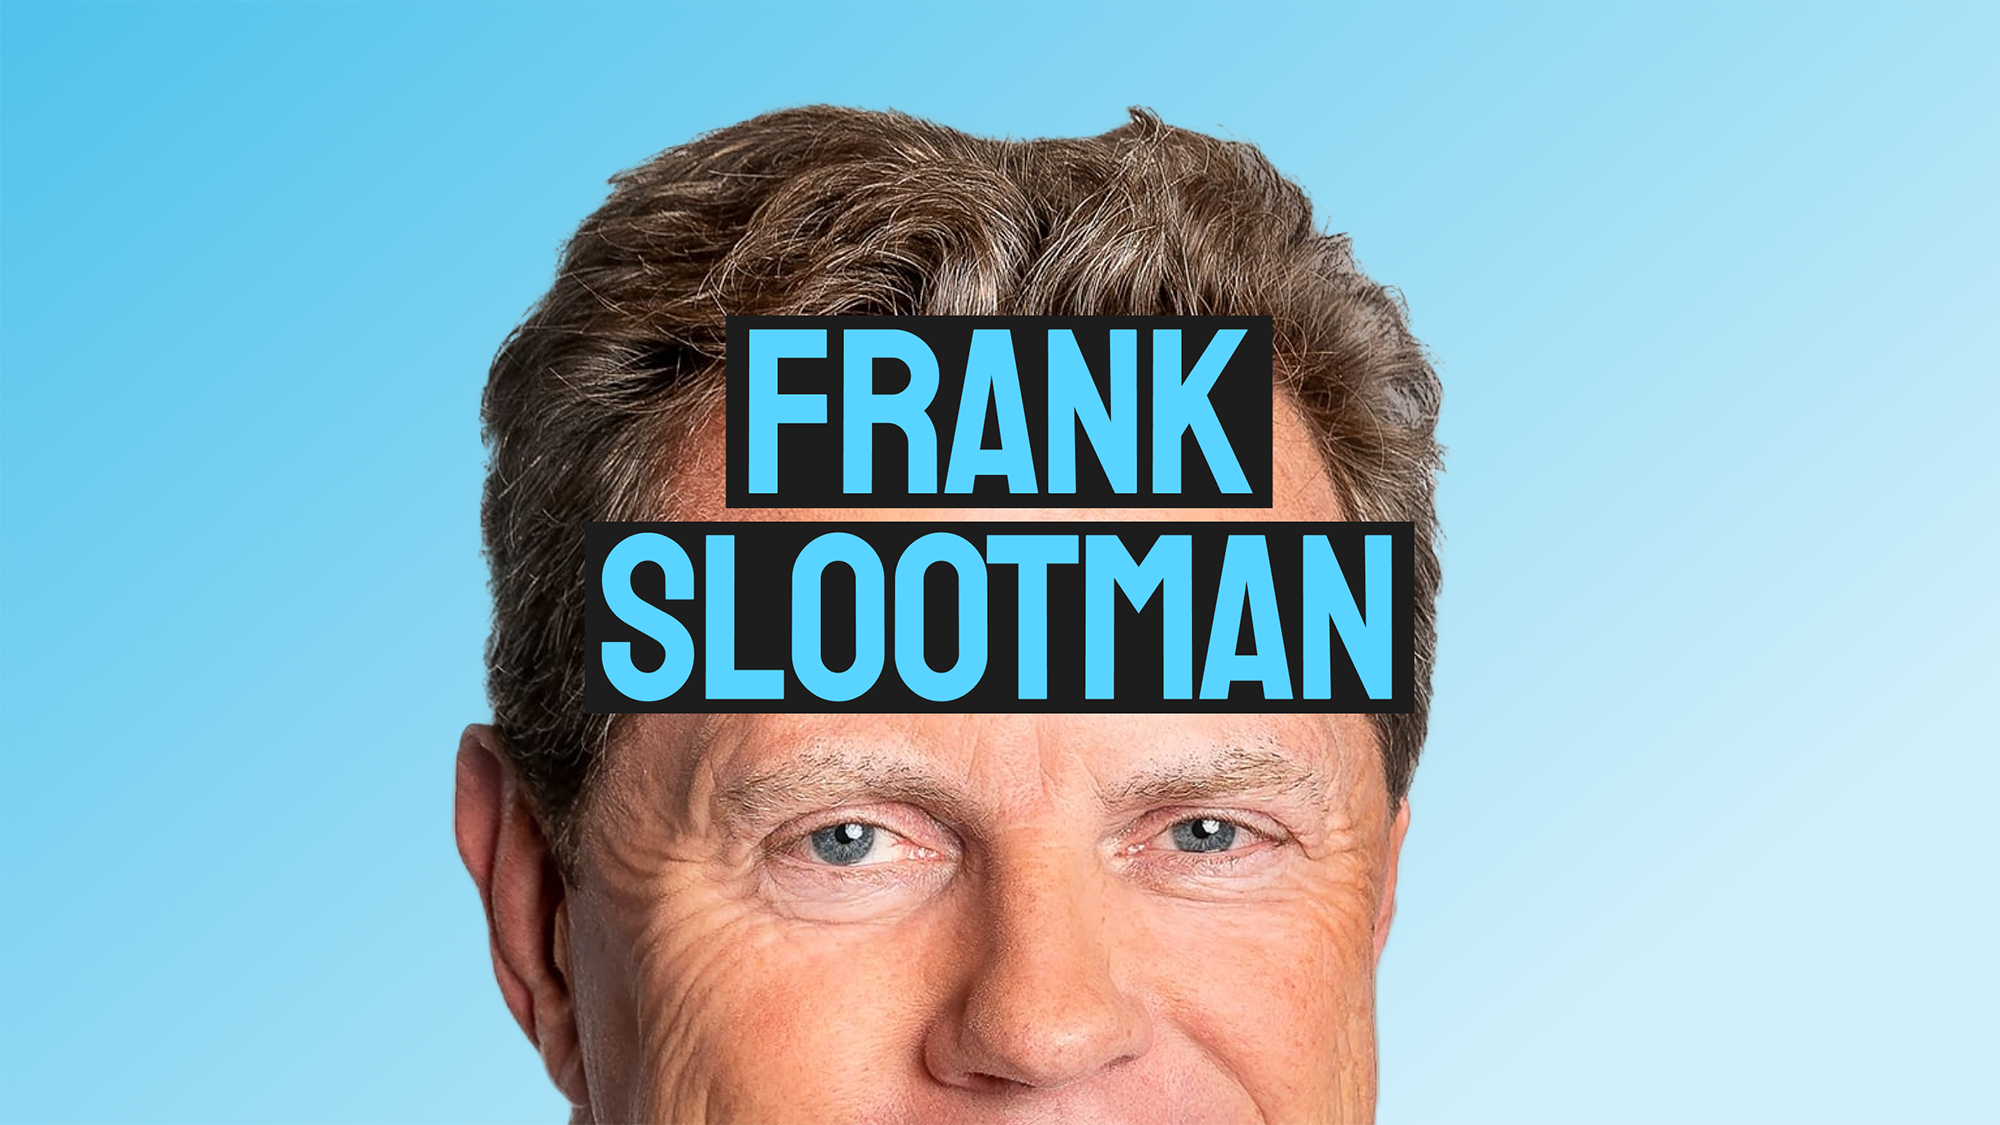 Frank Slootman: One of the Most Respected CEOs in Business